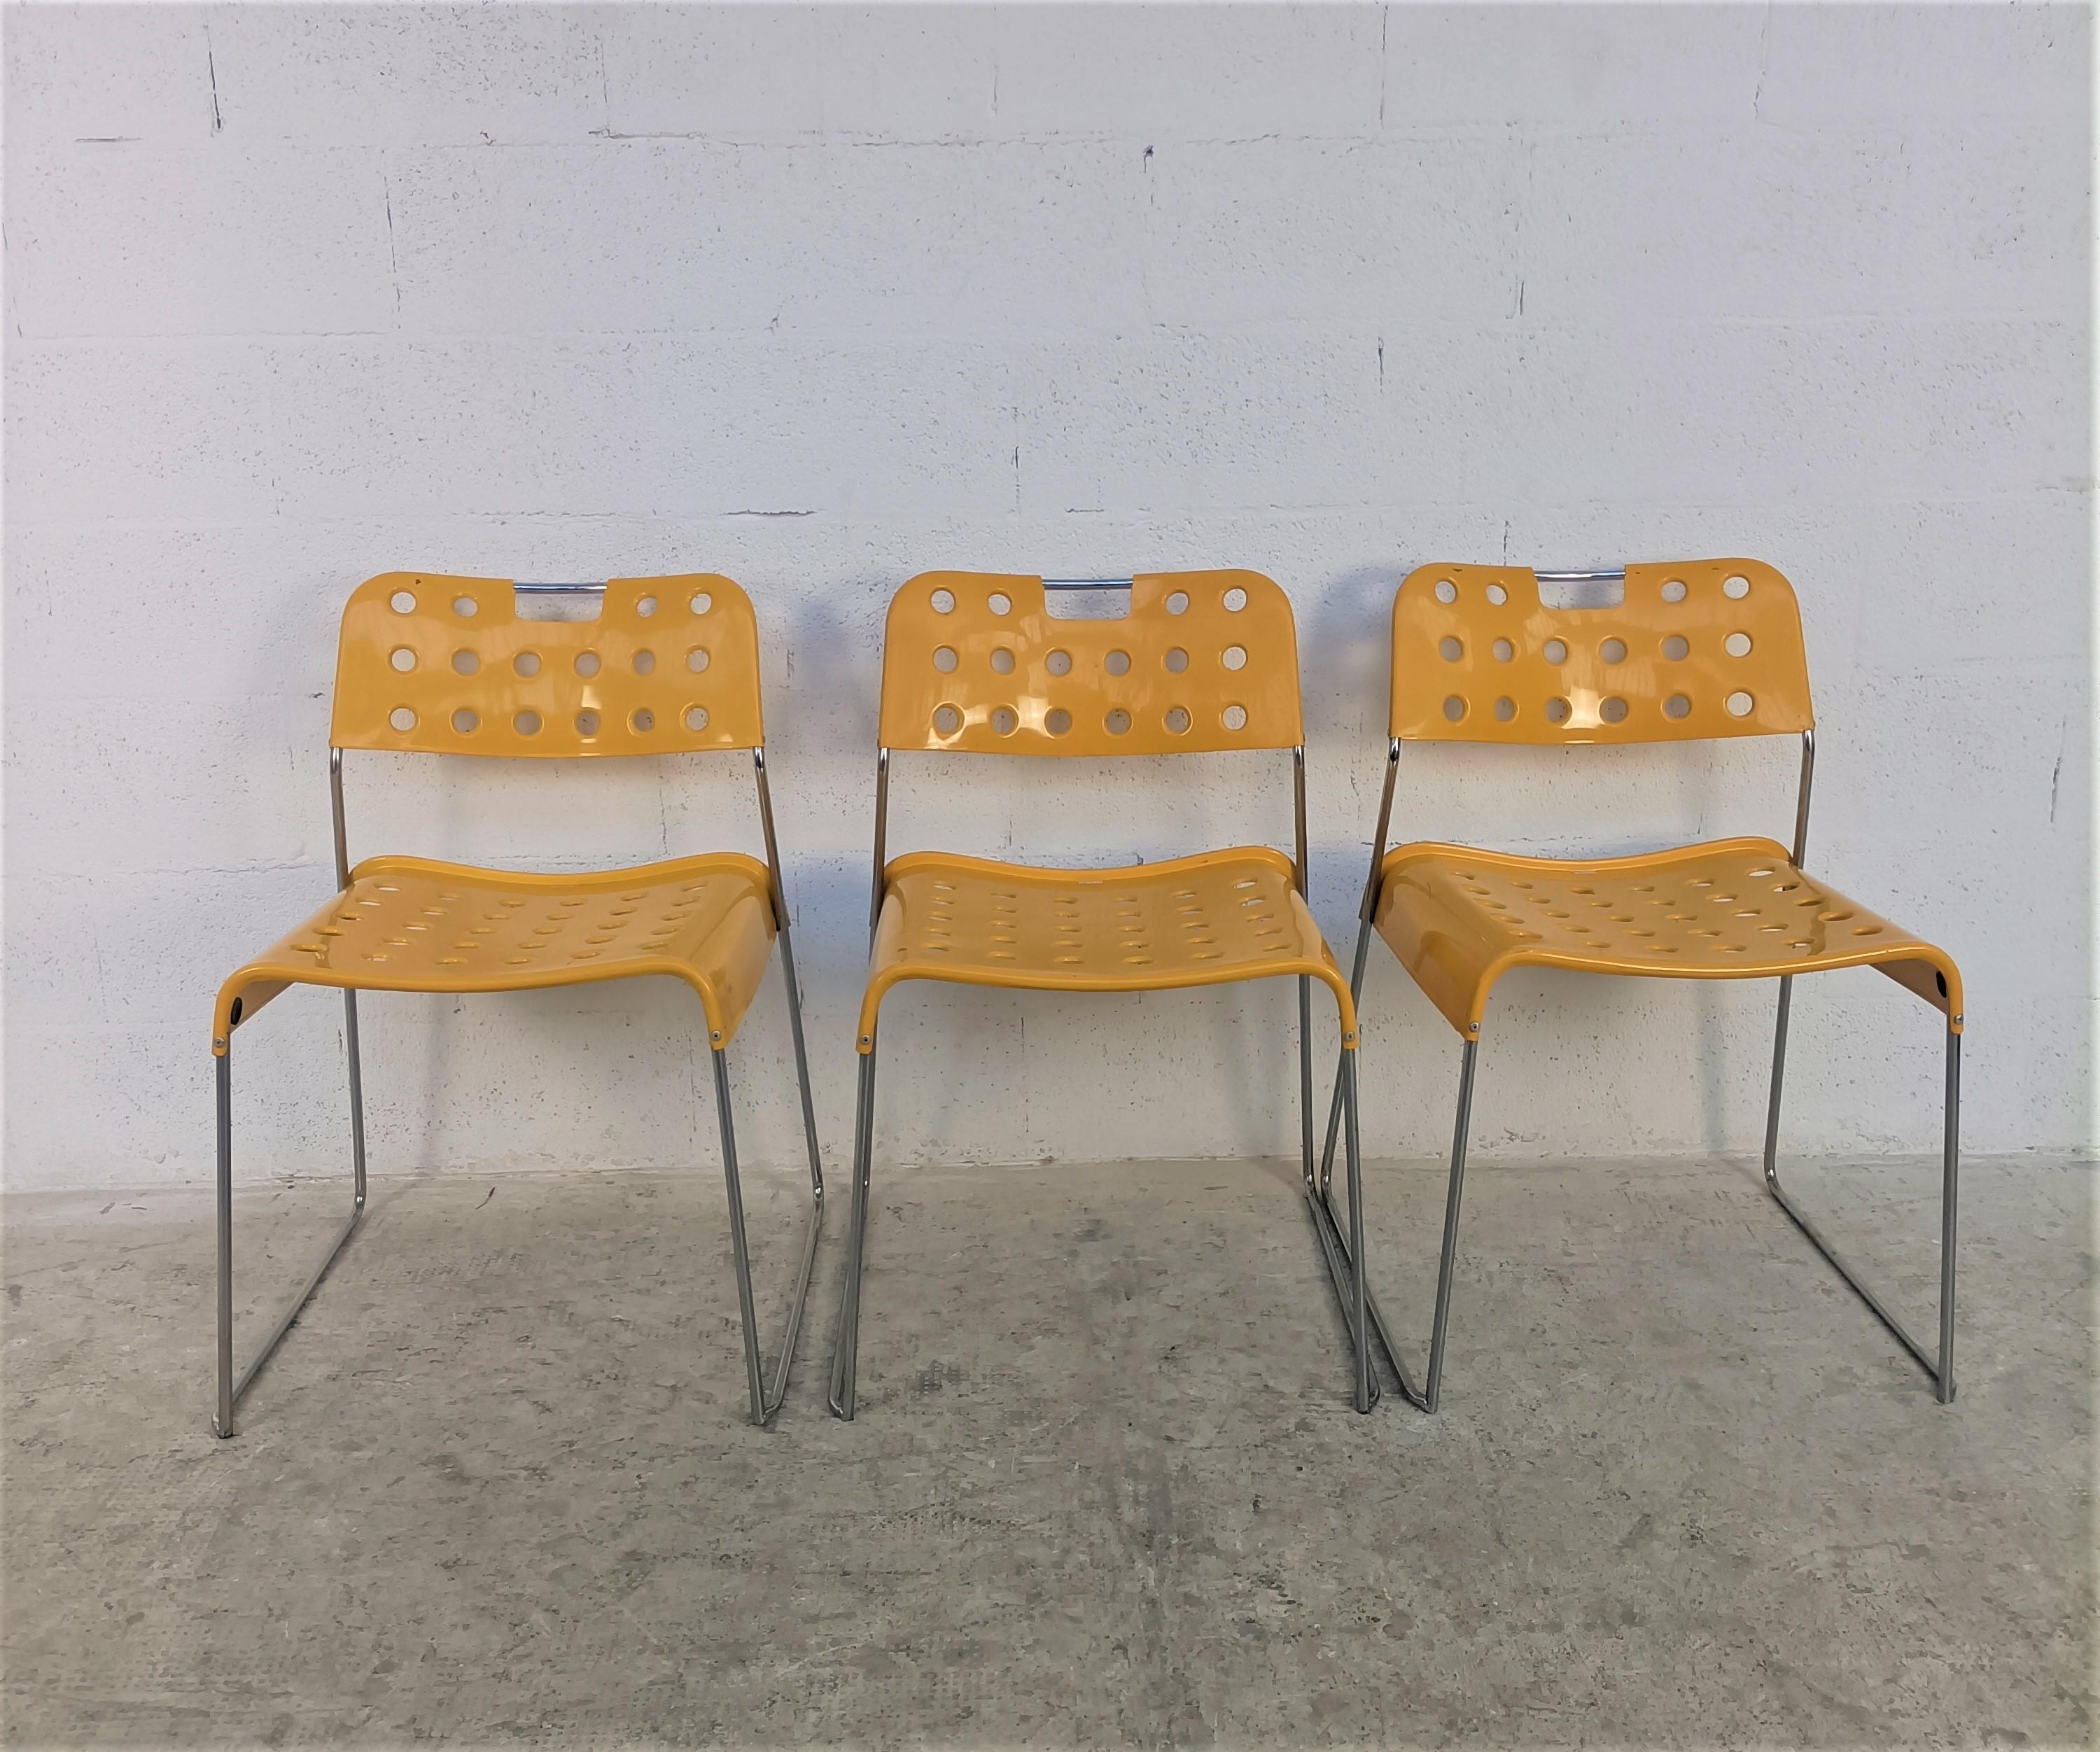 Mid-Century Modern 3 Yellow Omkstak Stackable Chairs by Rodney Kinsman for Bieffeplast 70s For Sale